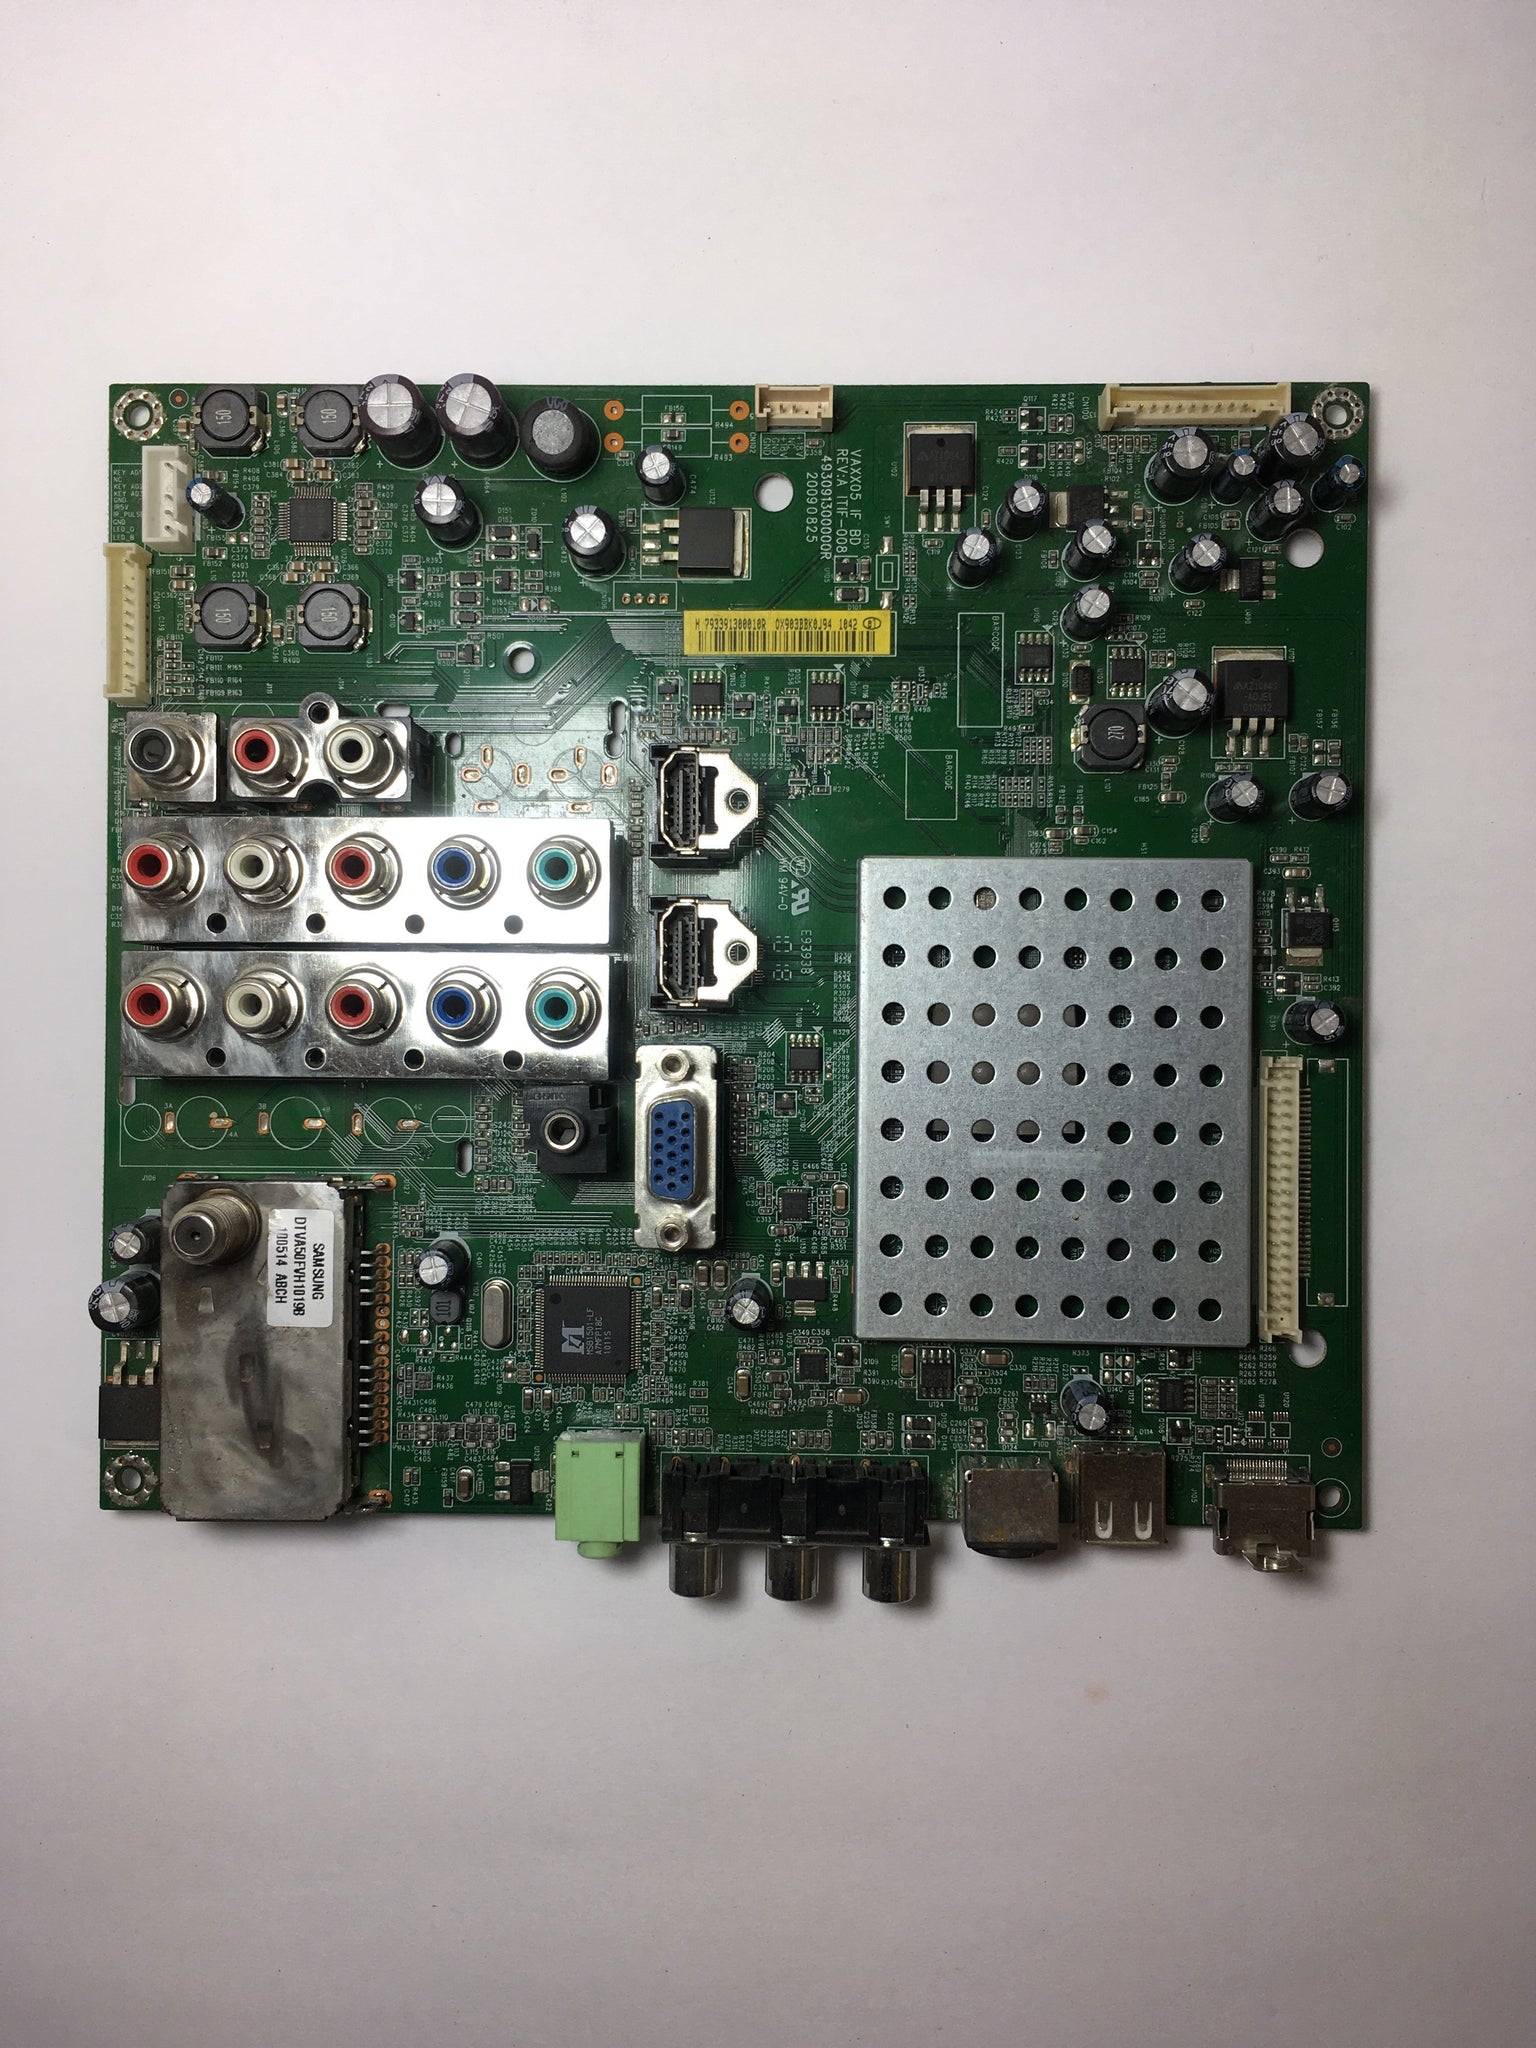 Acer 793391300010R (493091300000R) Main Board for AT3265